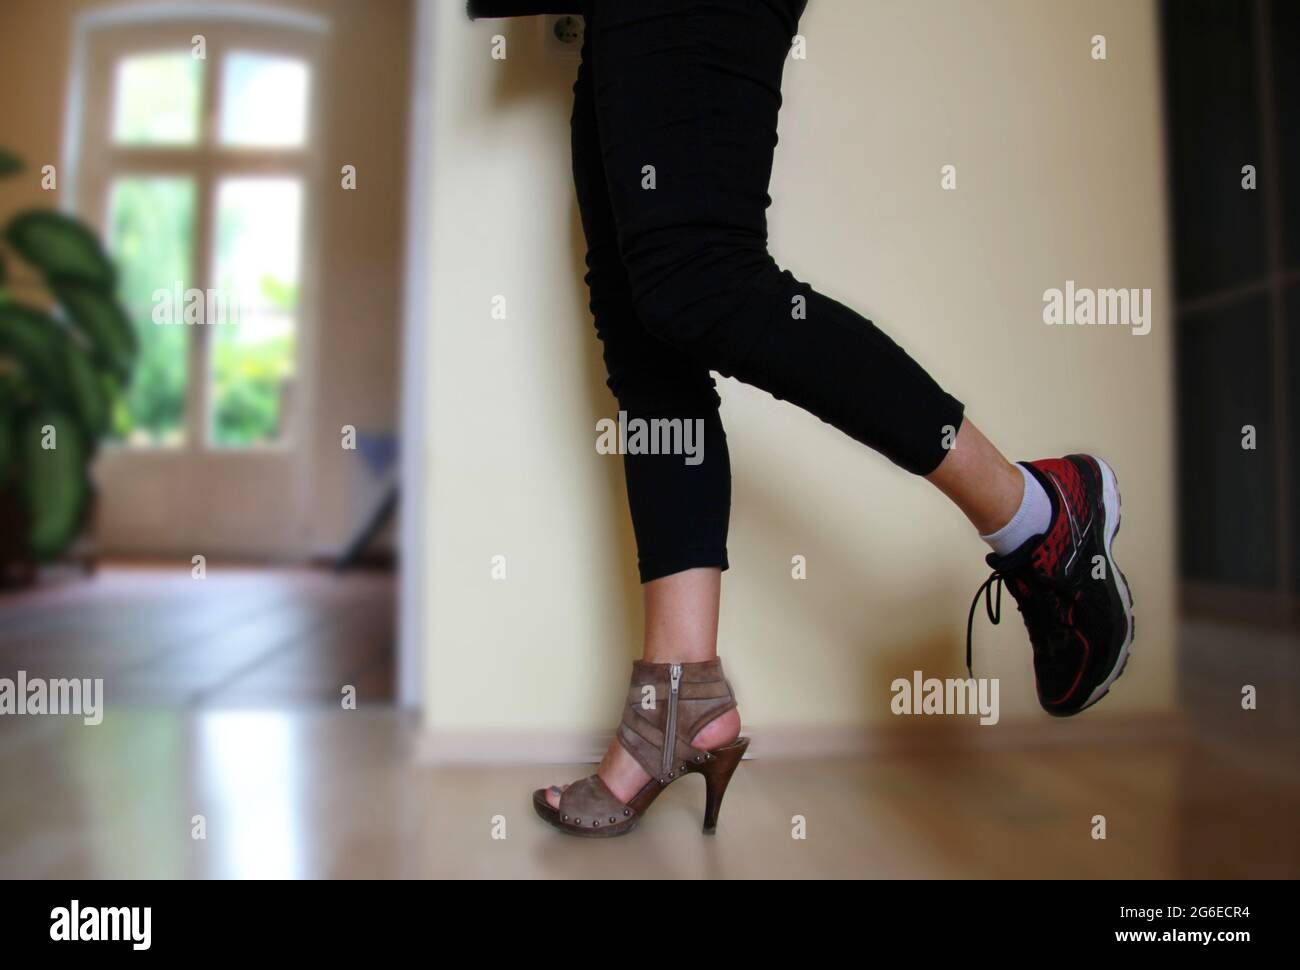 choosing shoes, sneakers versus high heels, one foot in high-heeled shoe  and one foot in sport shoes, woman wearing two different shoes Stock Photo  - Alamy